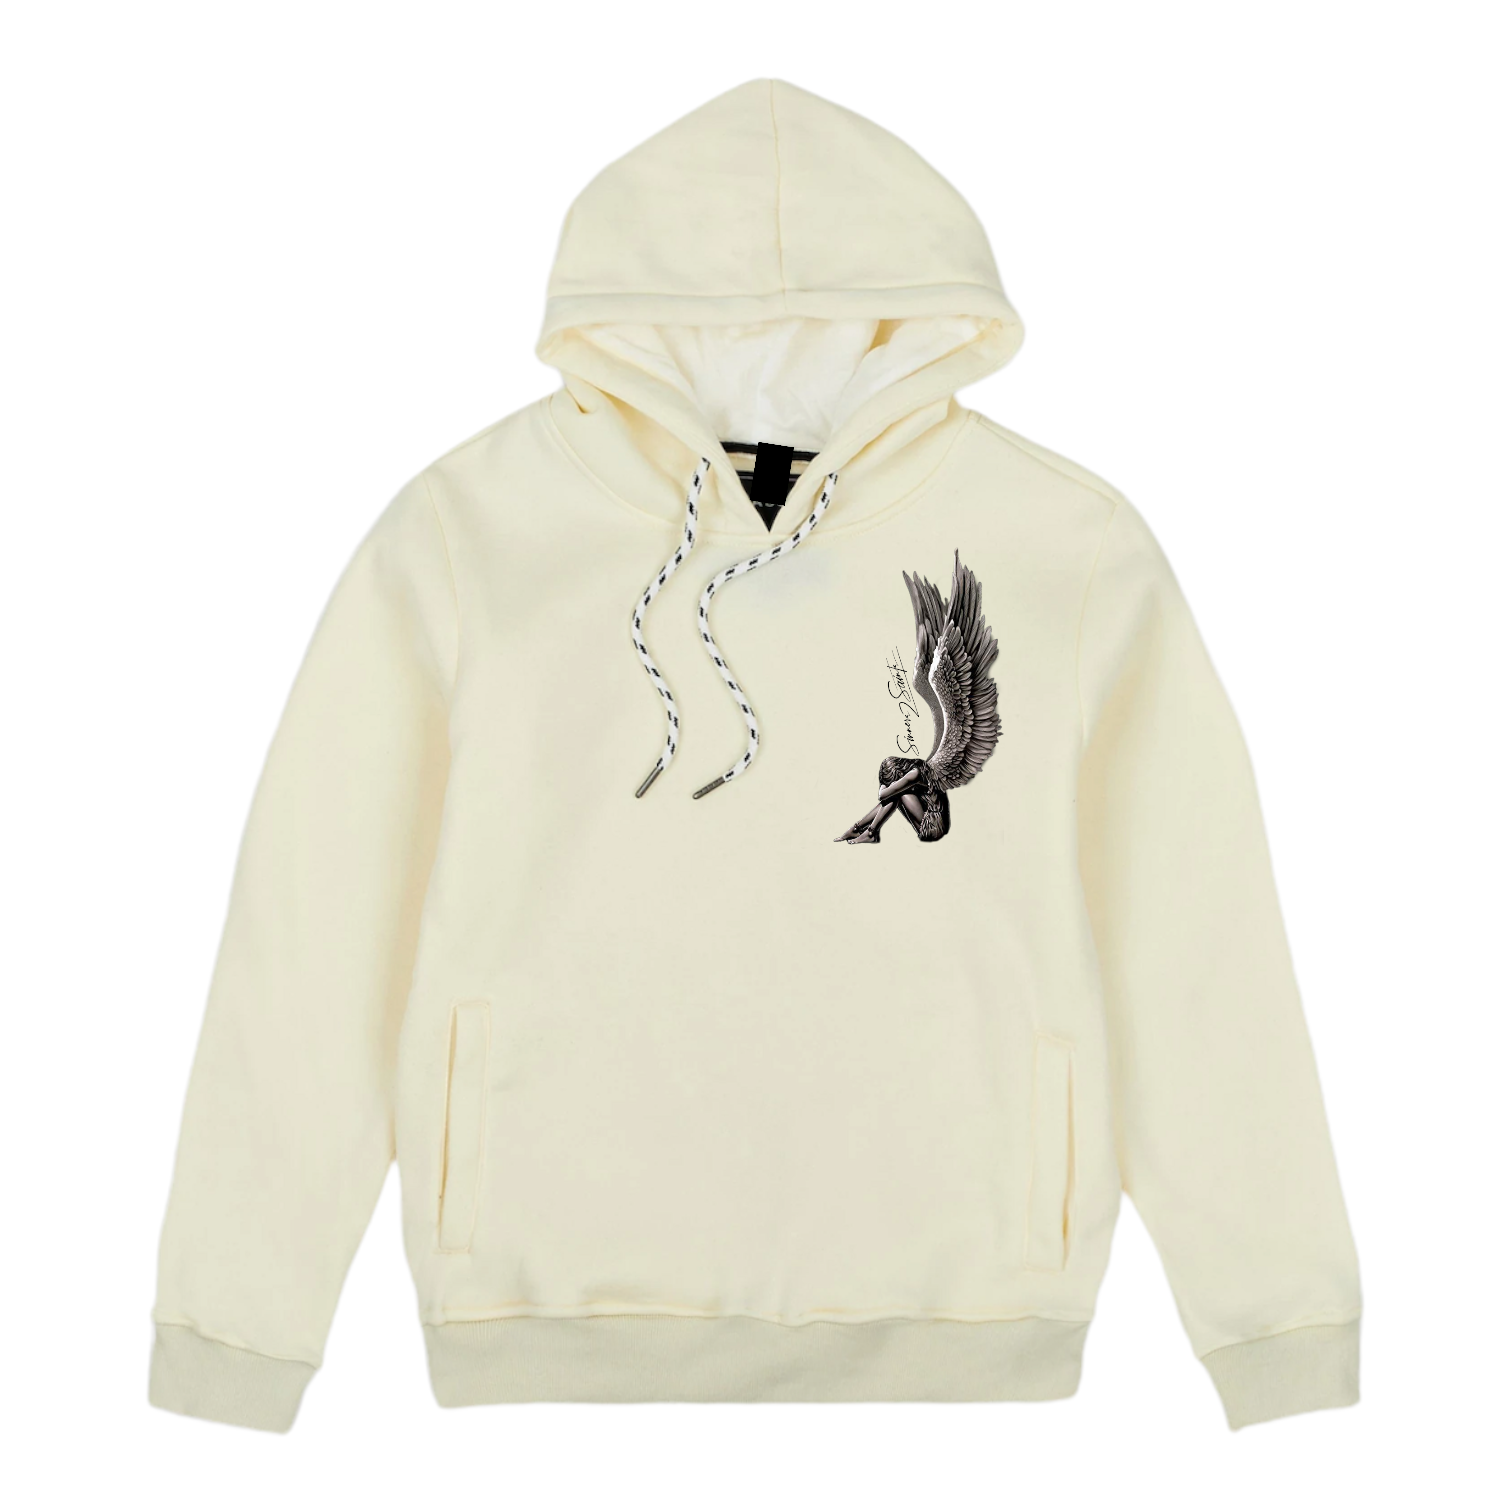 Angel Matching set (Hoodie with Pant) - Vanilla/Ecru color *Unisex - Limited stock only - TheSinners2Saints